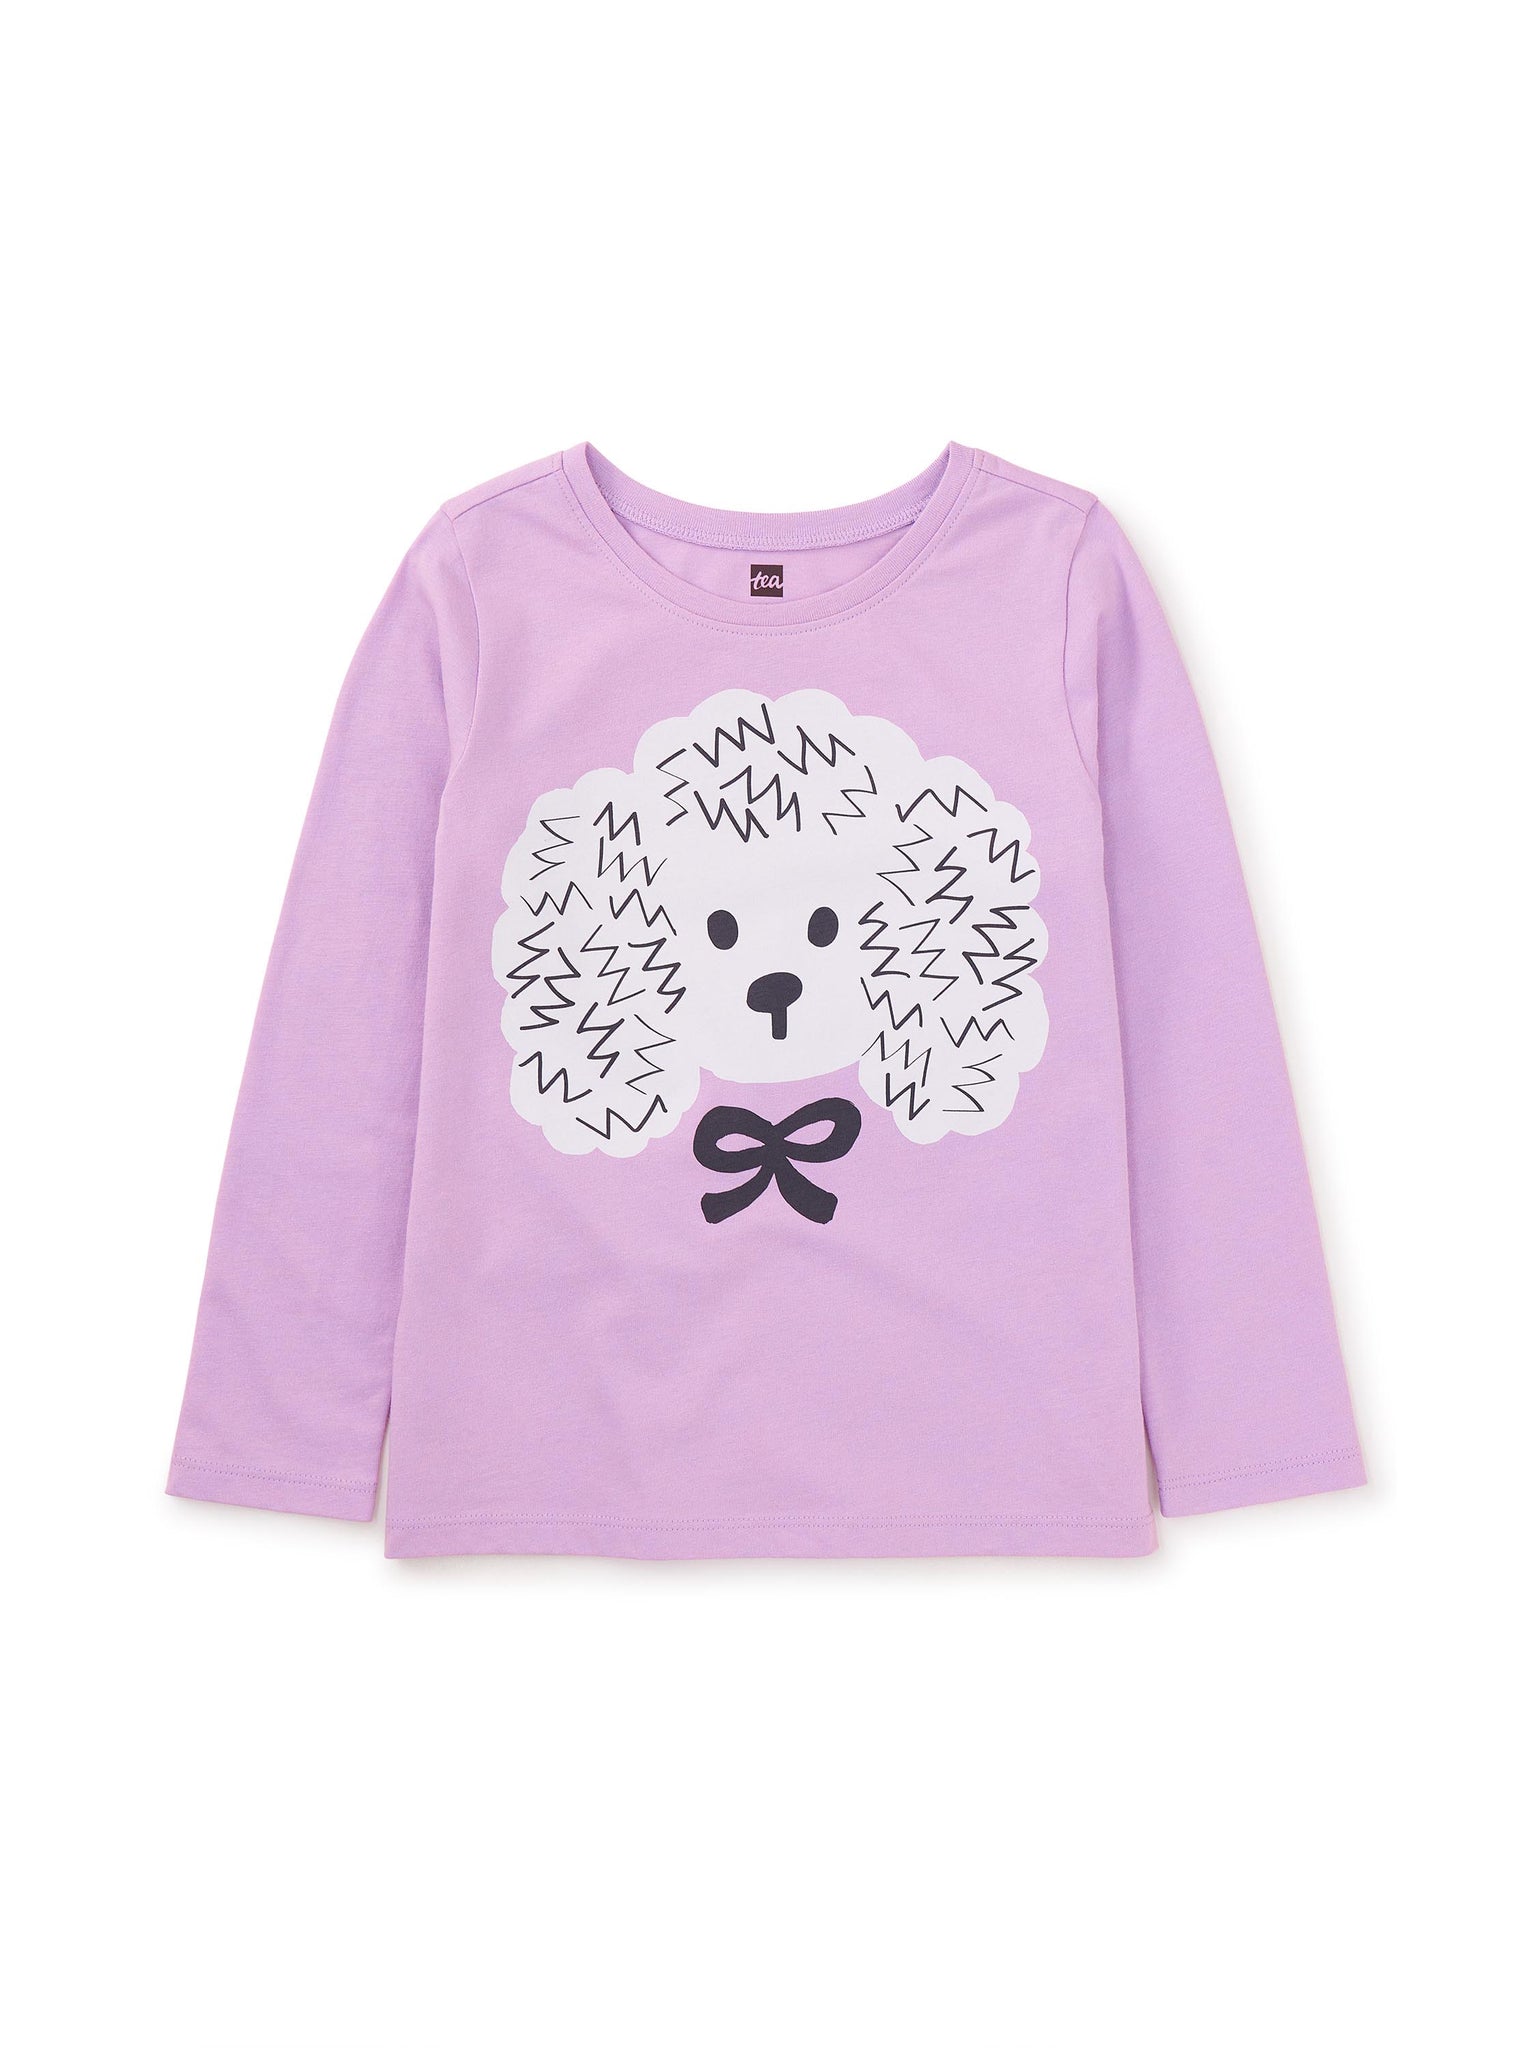 Poodle & Bow Graphic Tee